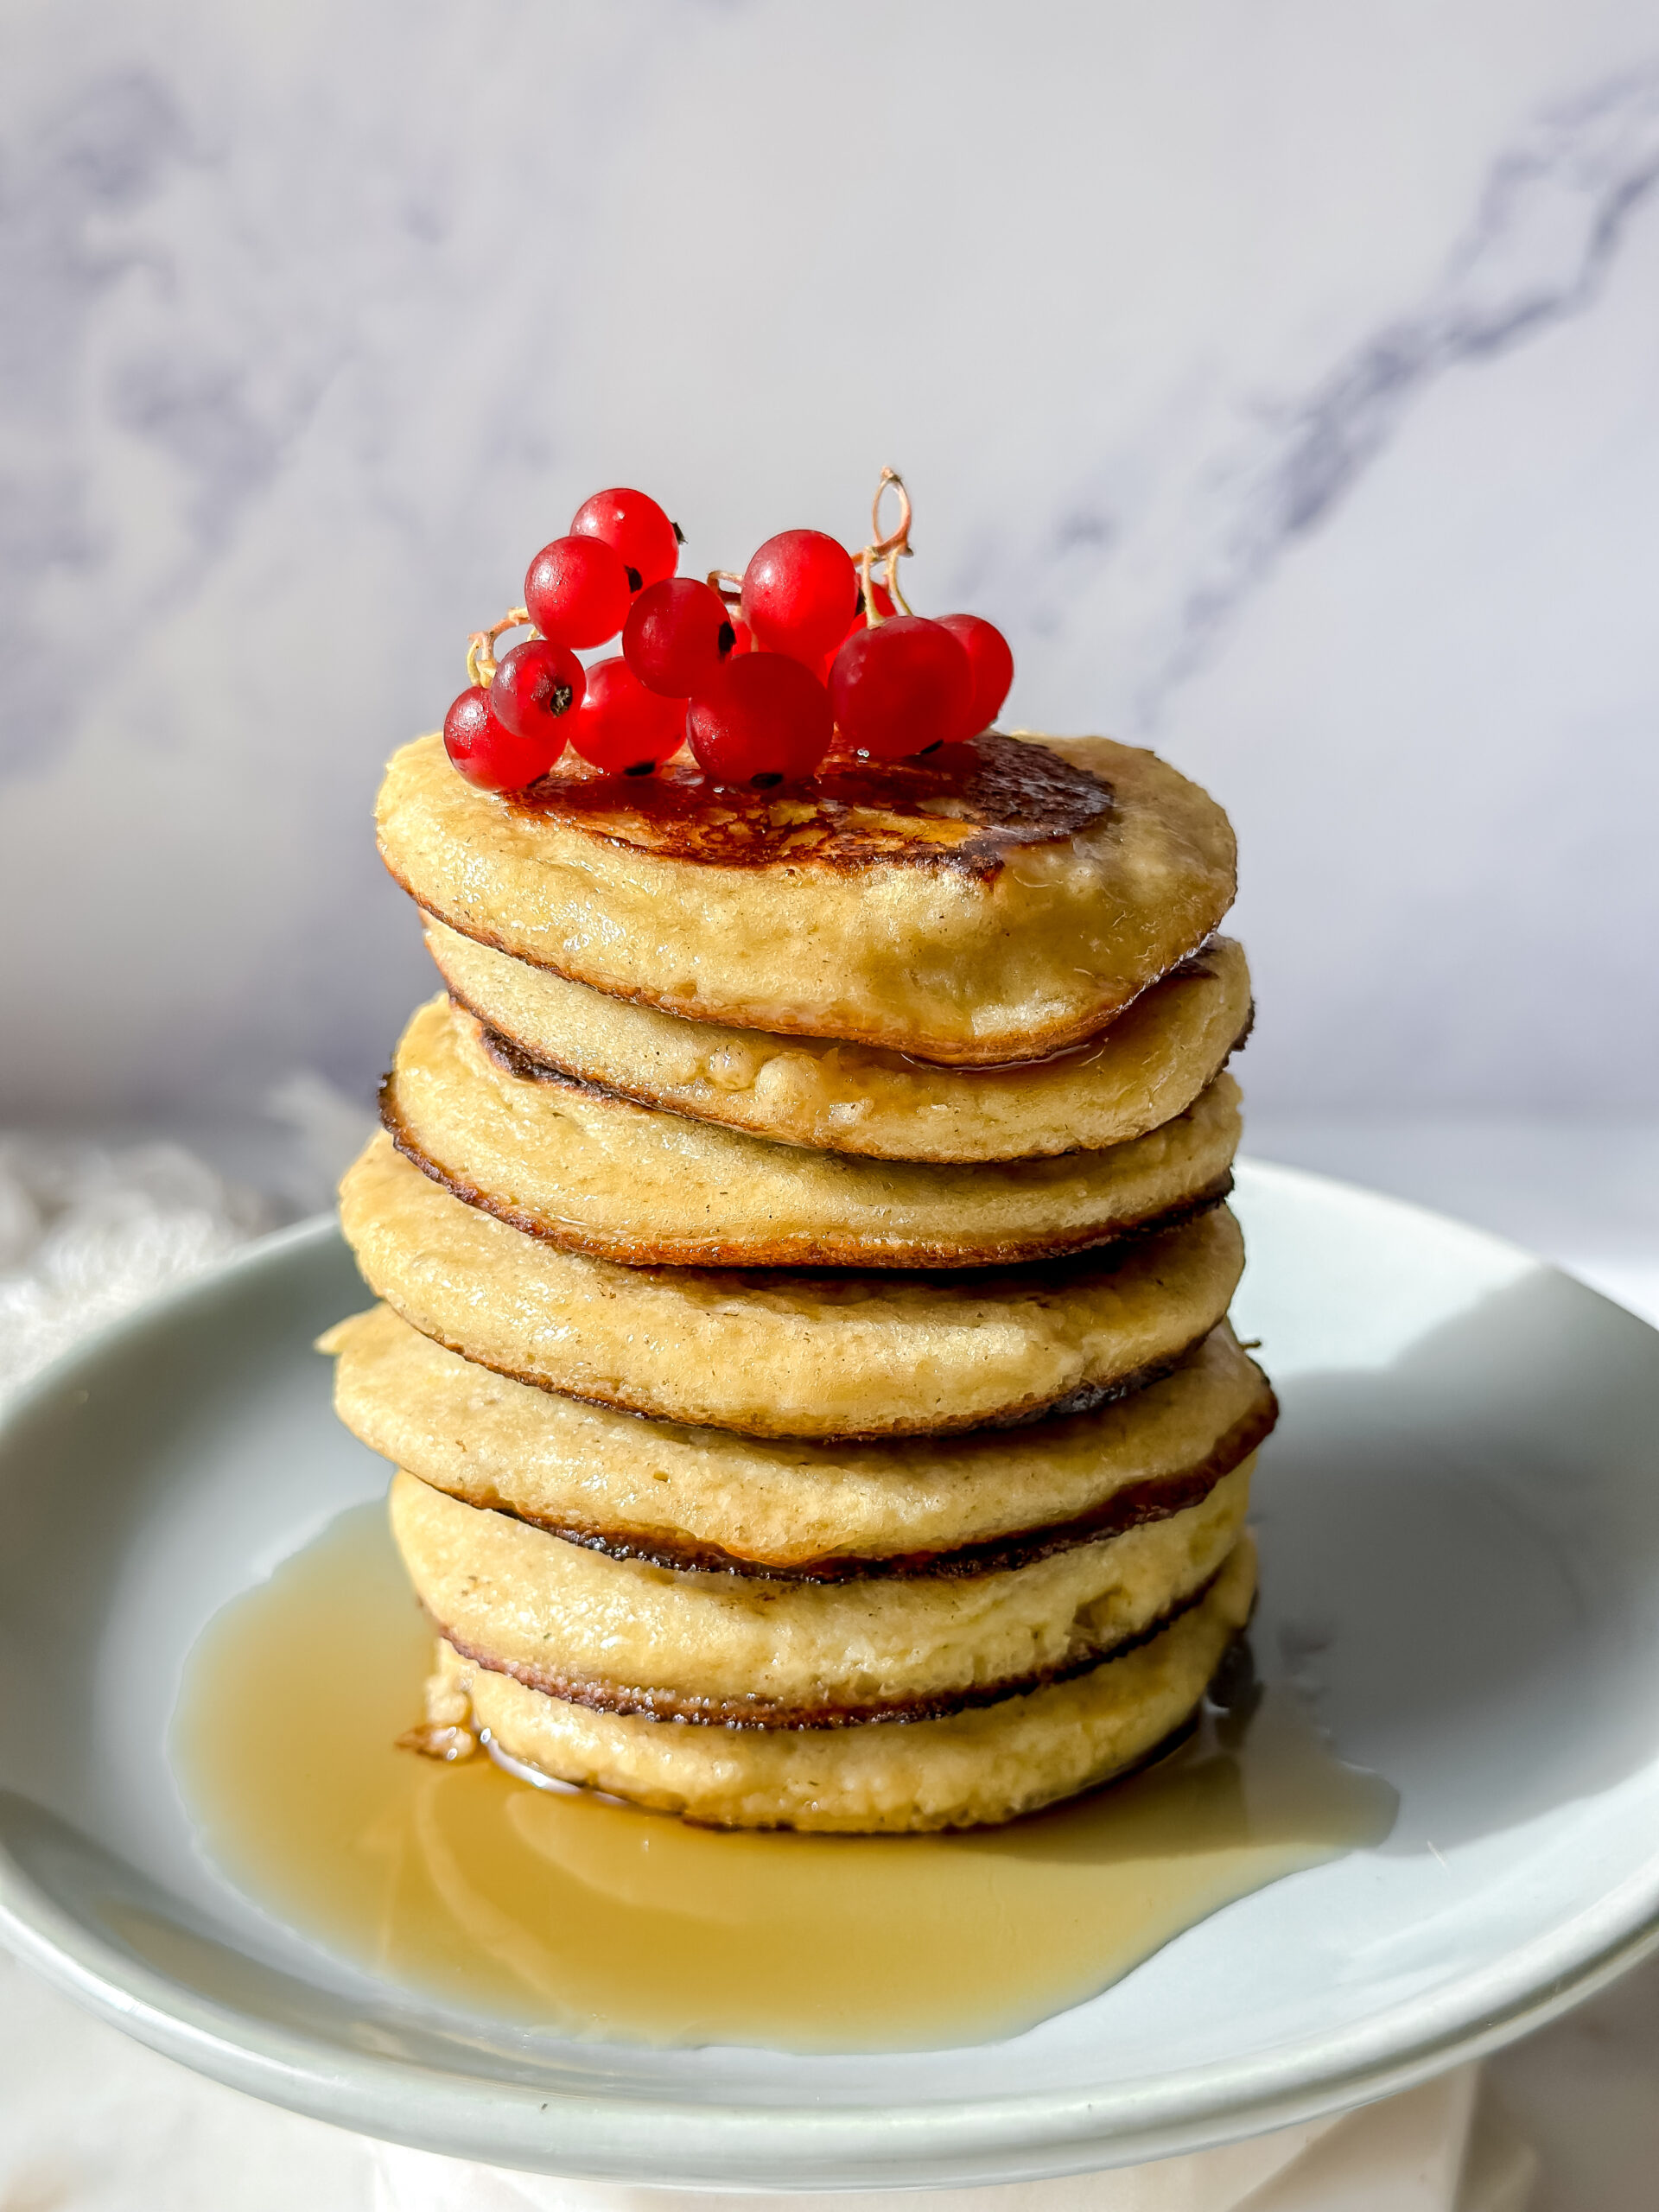 stack of banana pancakes with red currants and maple syrup on top